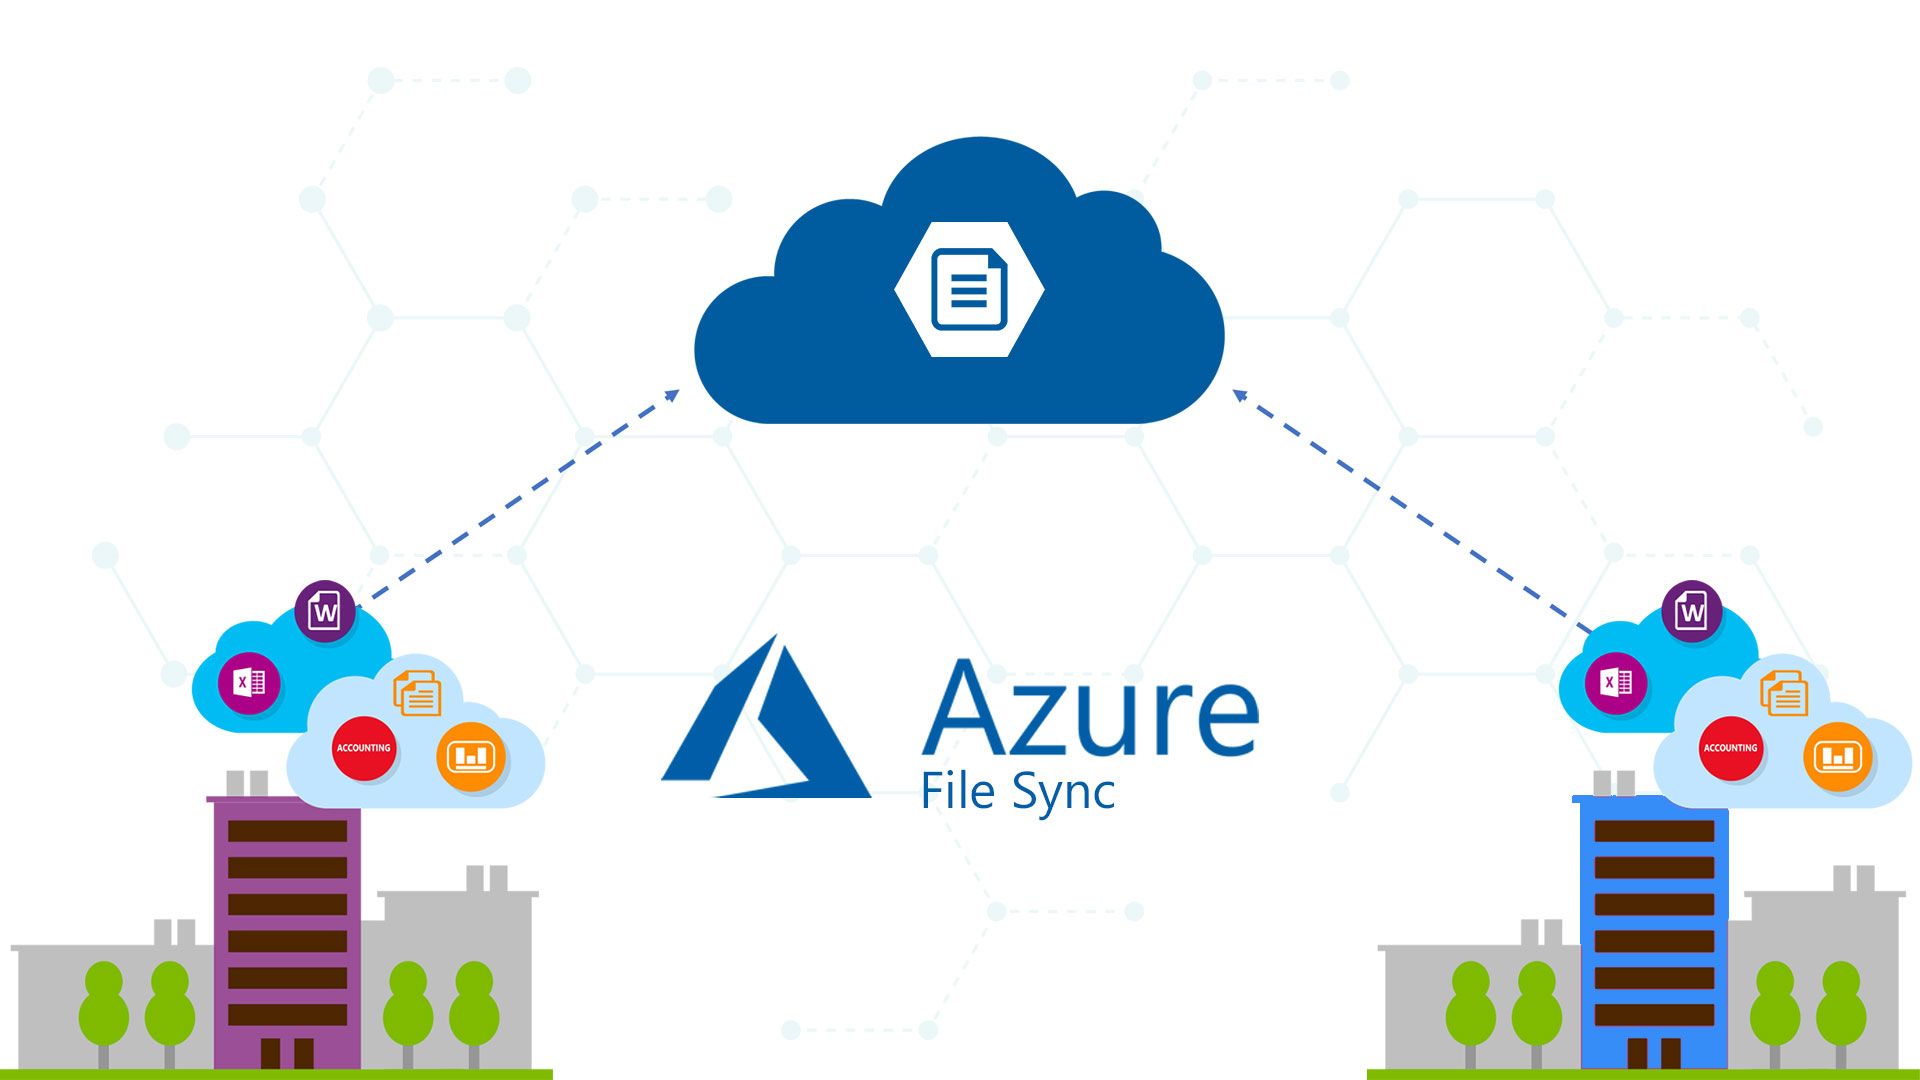 Sync On-premises File servers with Azure using the Azure file sync service